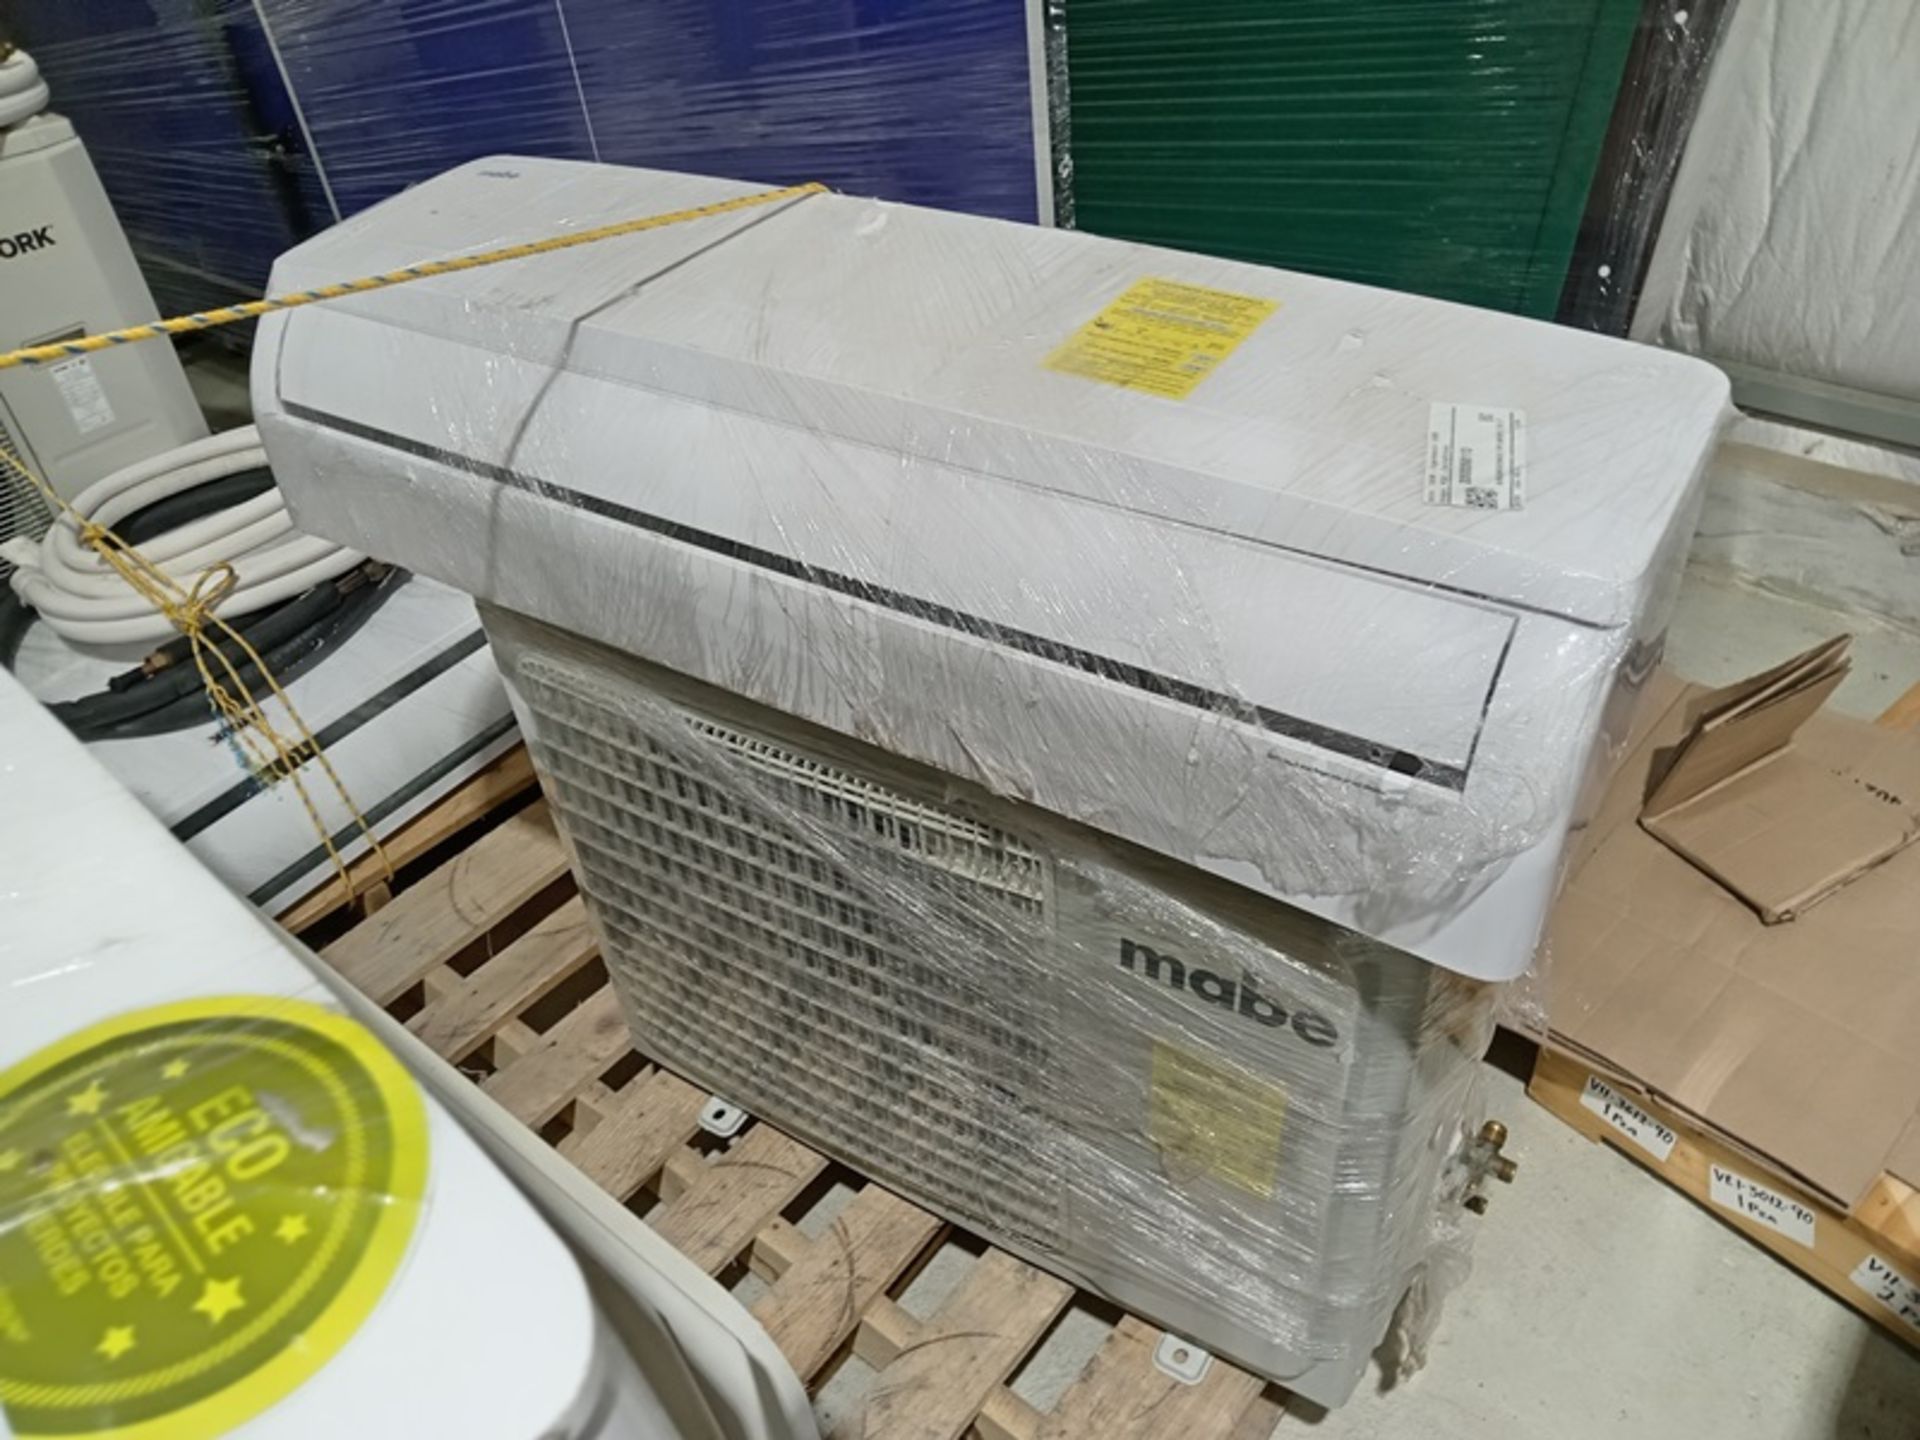 LOT OF (2) 2 TON AIR CONDITIONING EQUIPMENT - Image 2 of 2